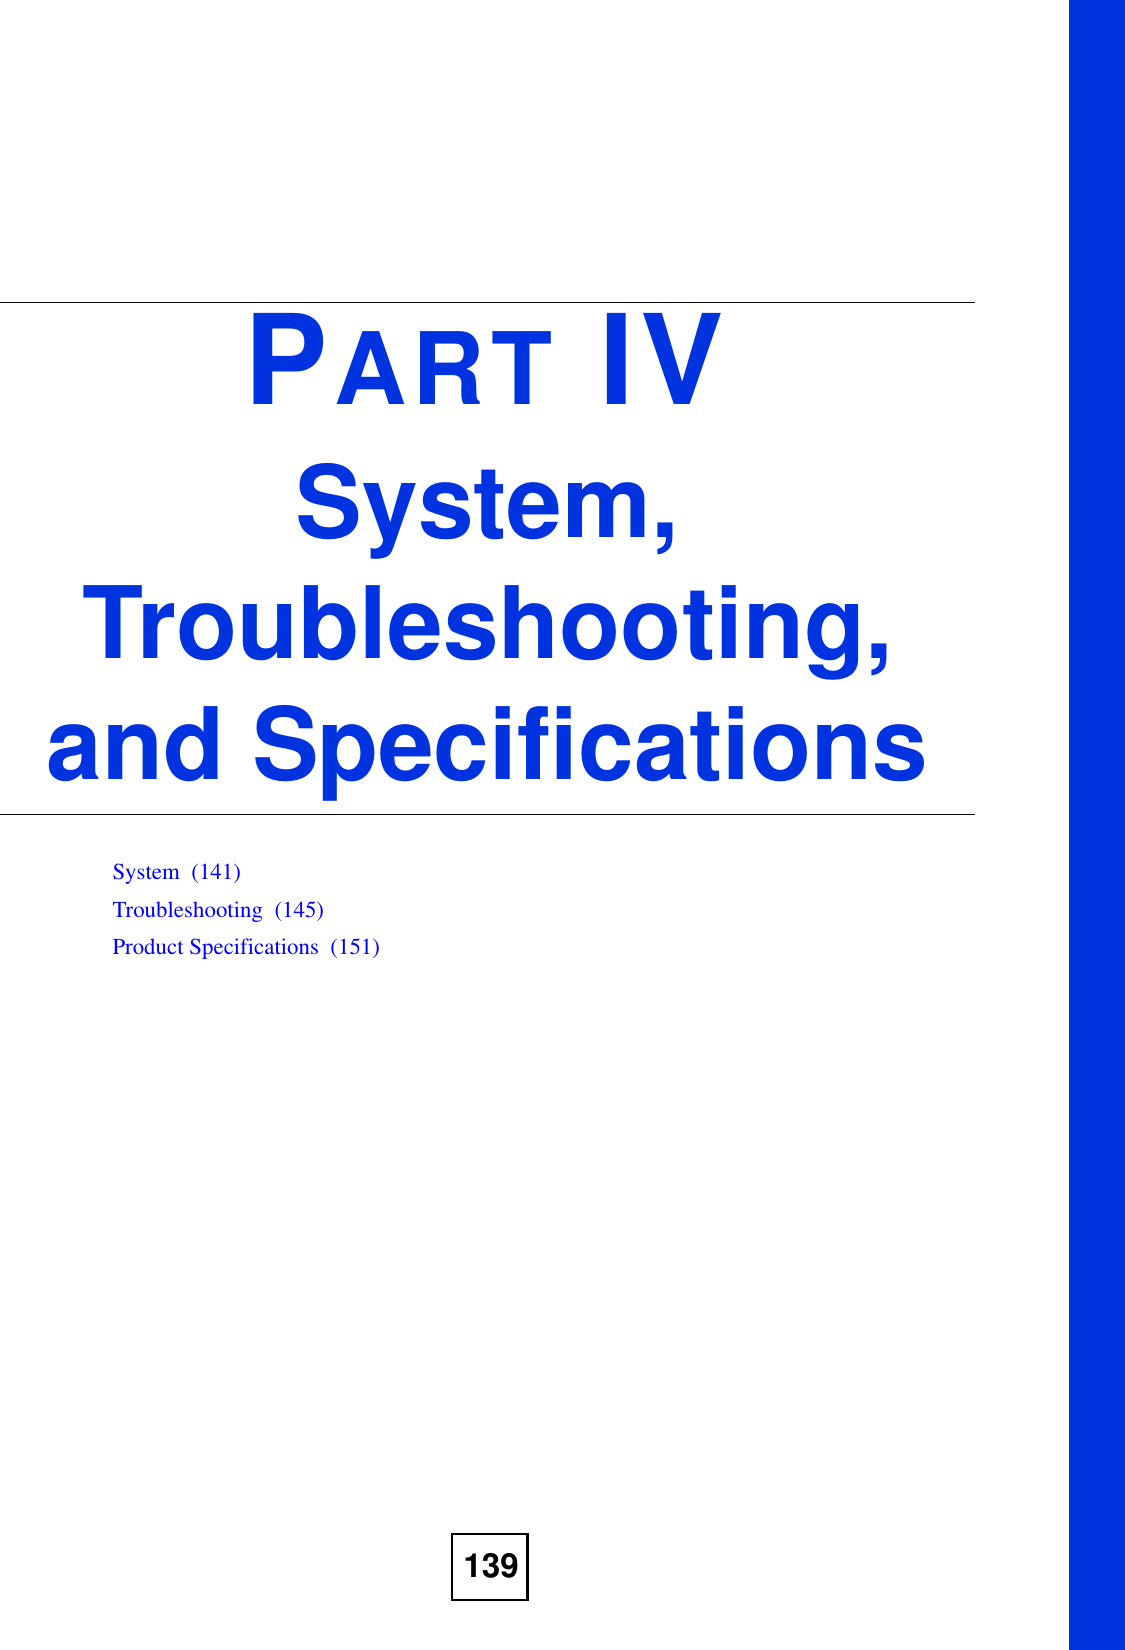 139PART IVSystem, Troubleshooting, and SpecificationsSystem  (141)Troubleshooting  (145)Product Specifications  (151)